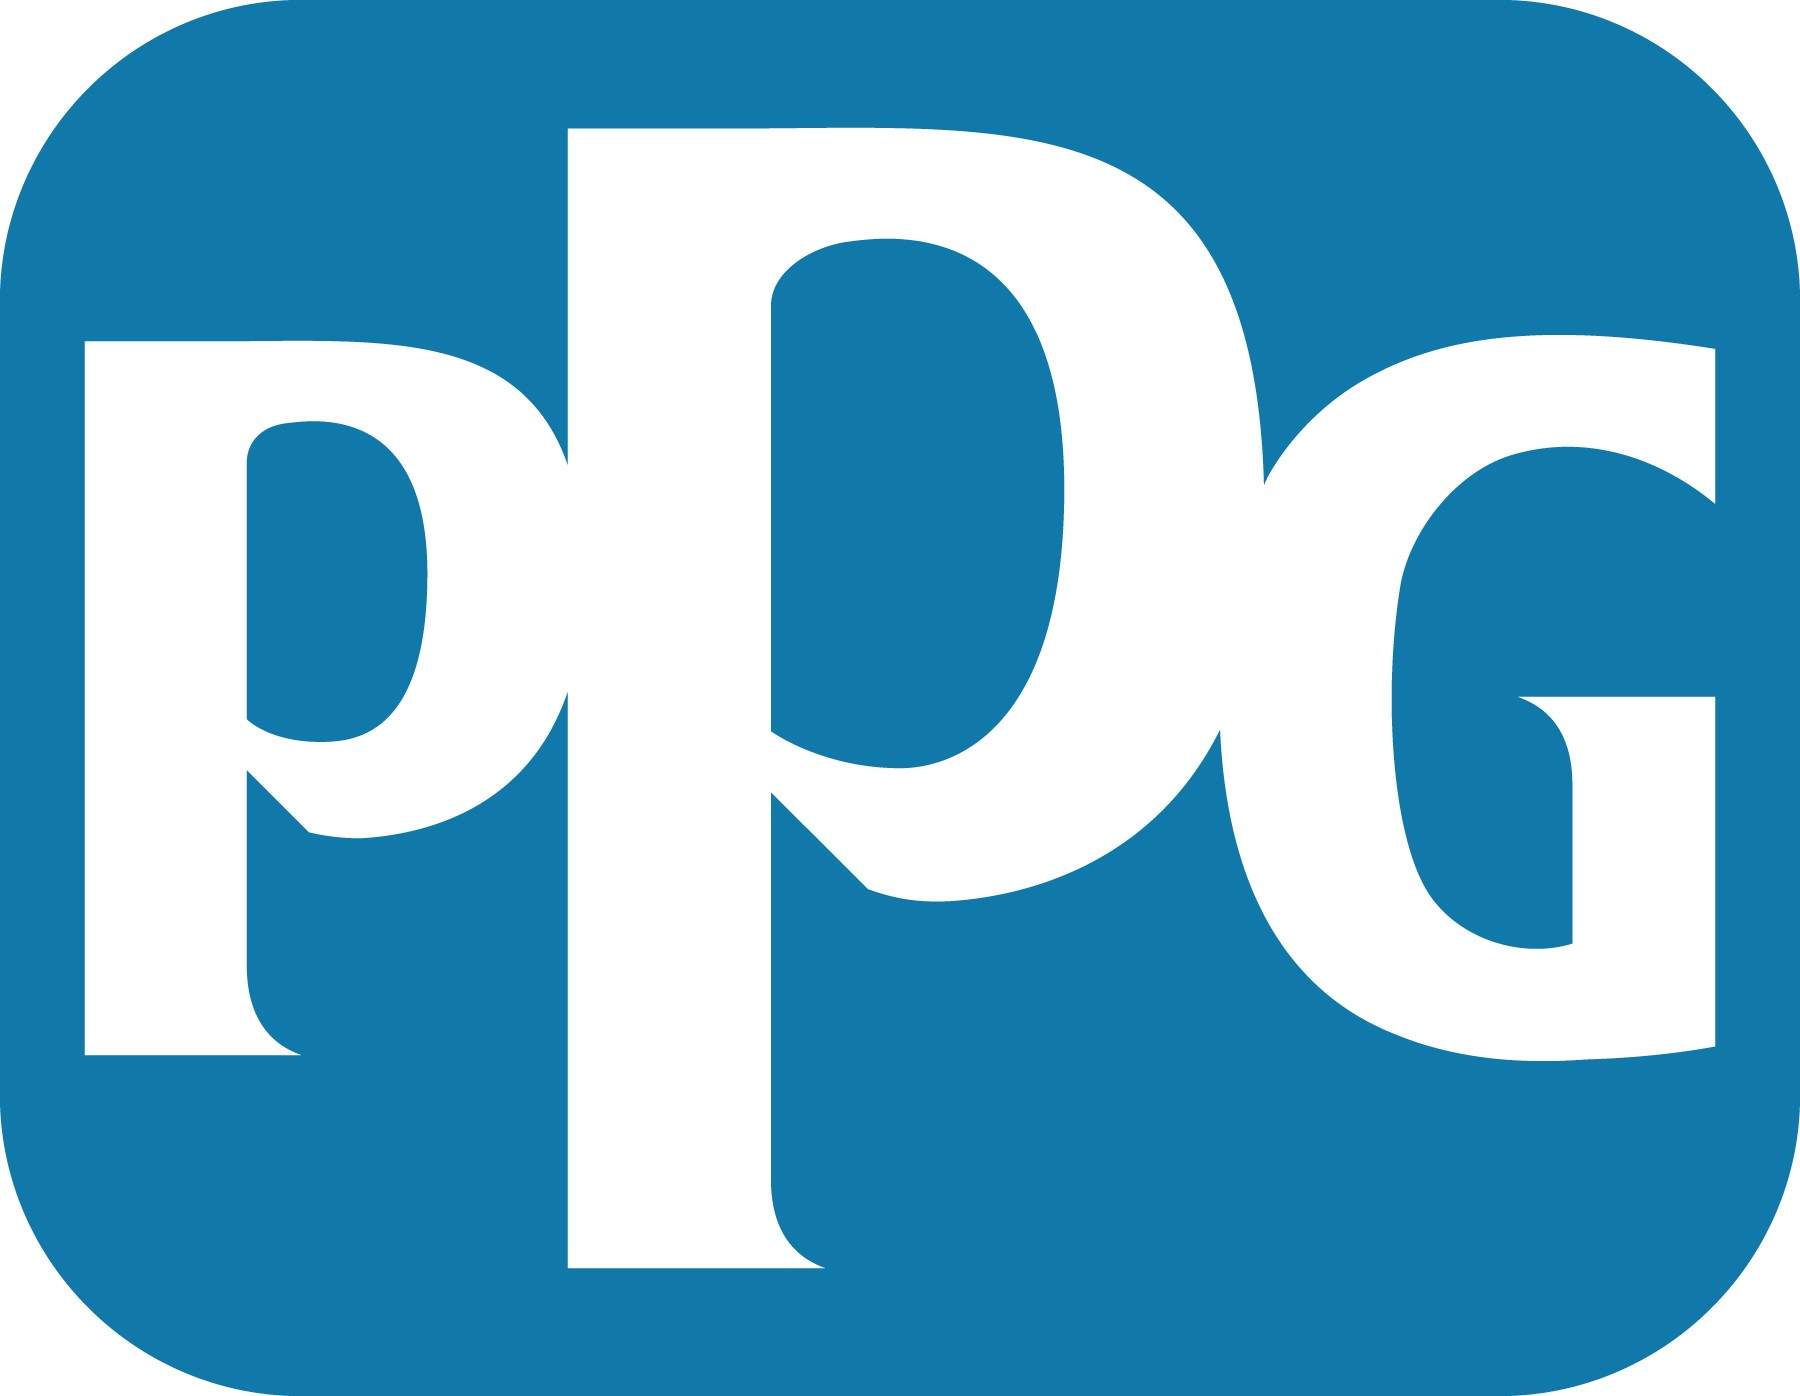 PPG unveils non-BPA internal spray coating for aluminium beverage cans